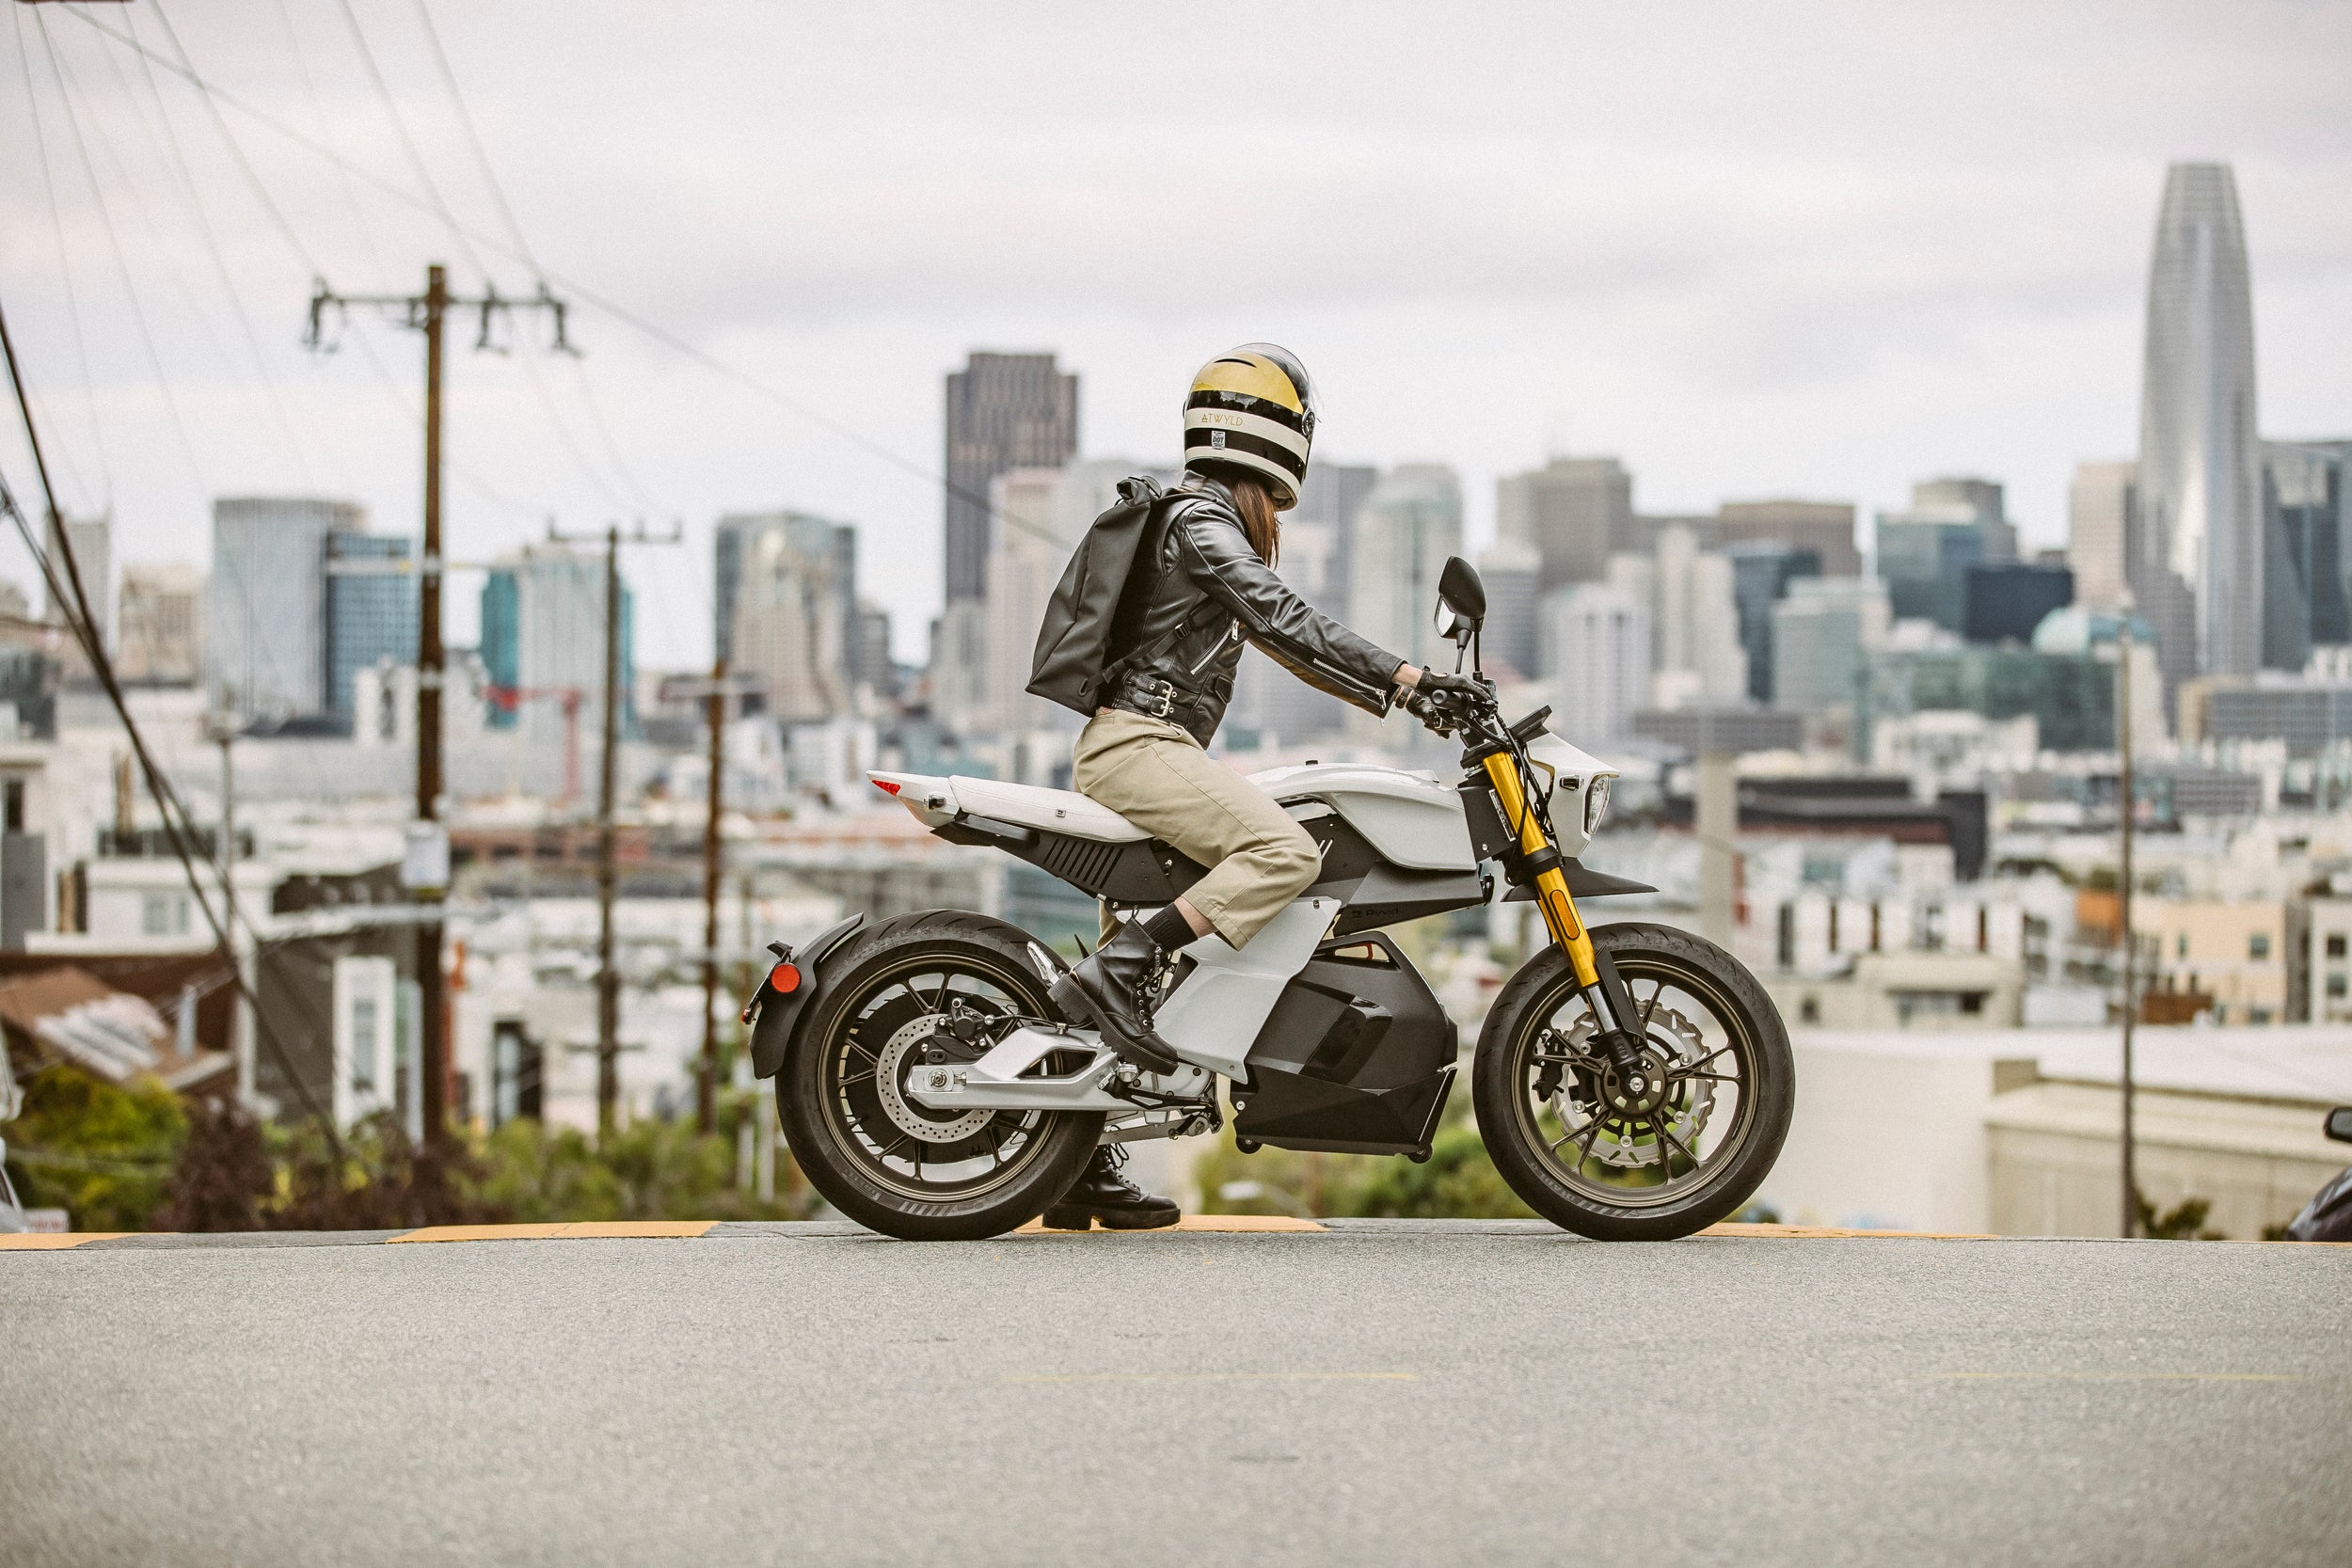 The Manual: 'For $100, you can preorder this incredible new electric motorcycle'